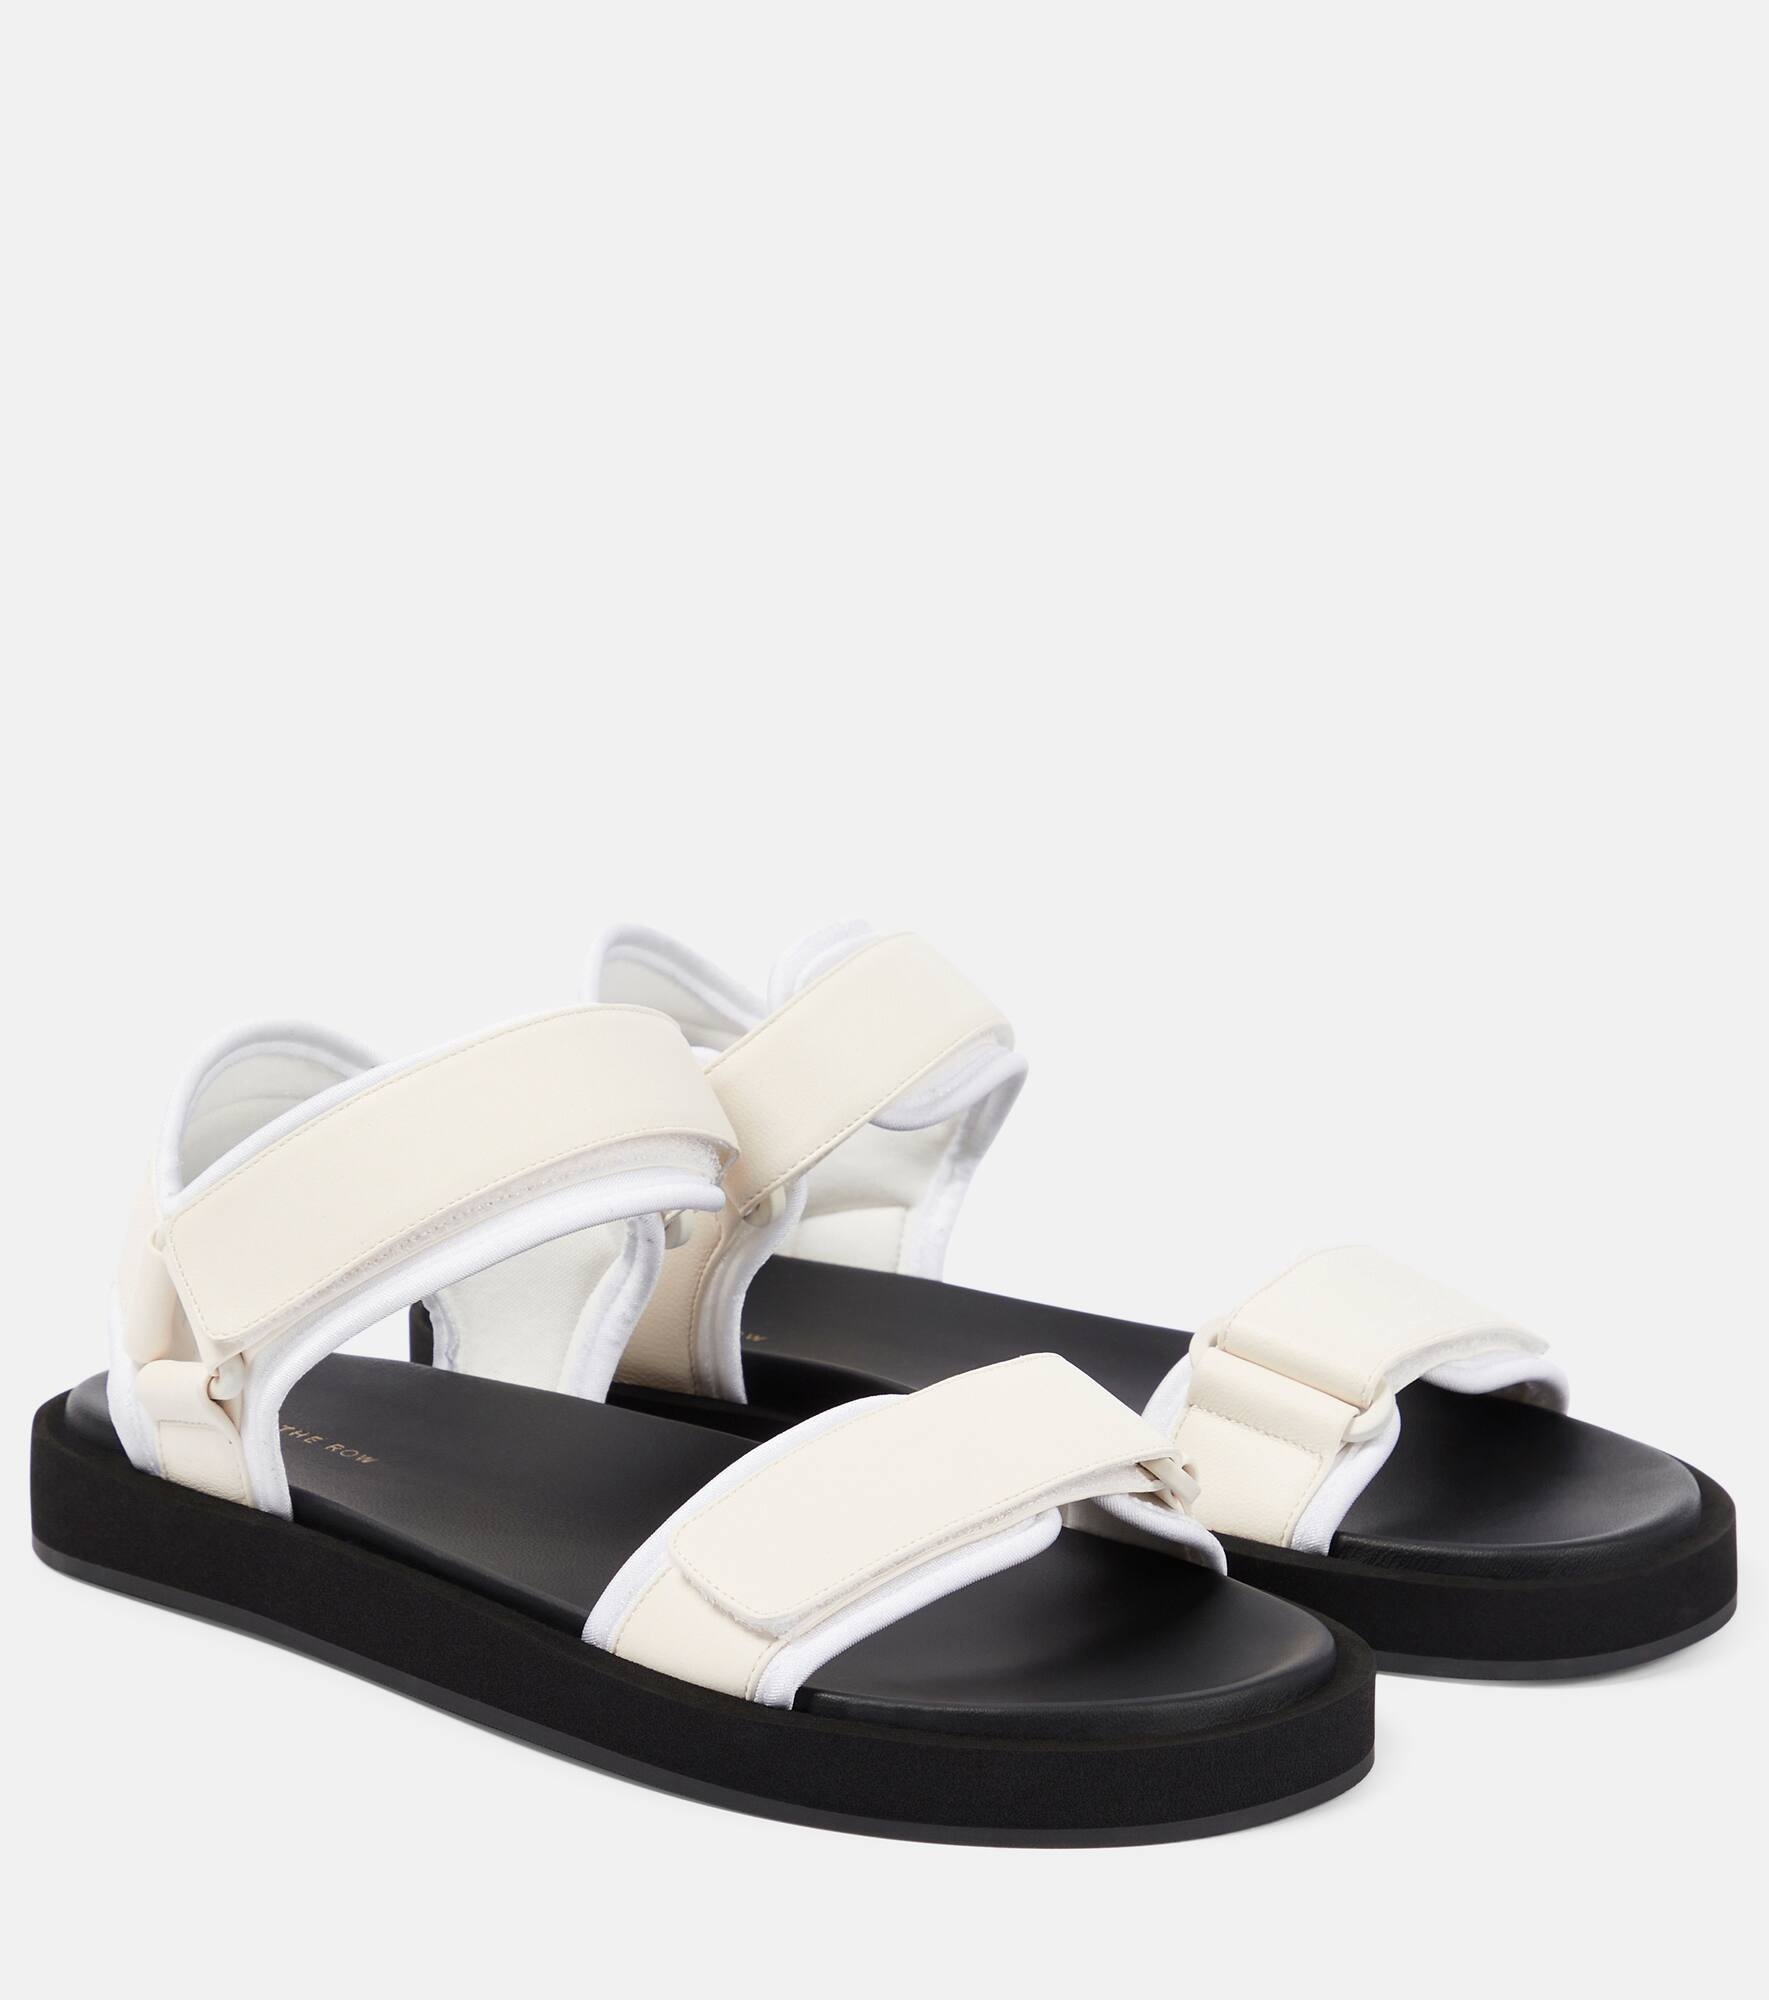 Hook and Loop leather sandals - 1